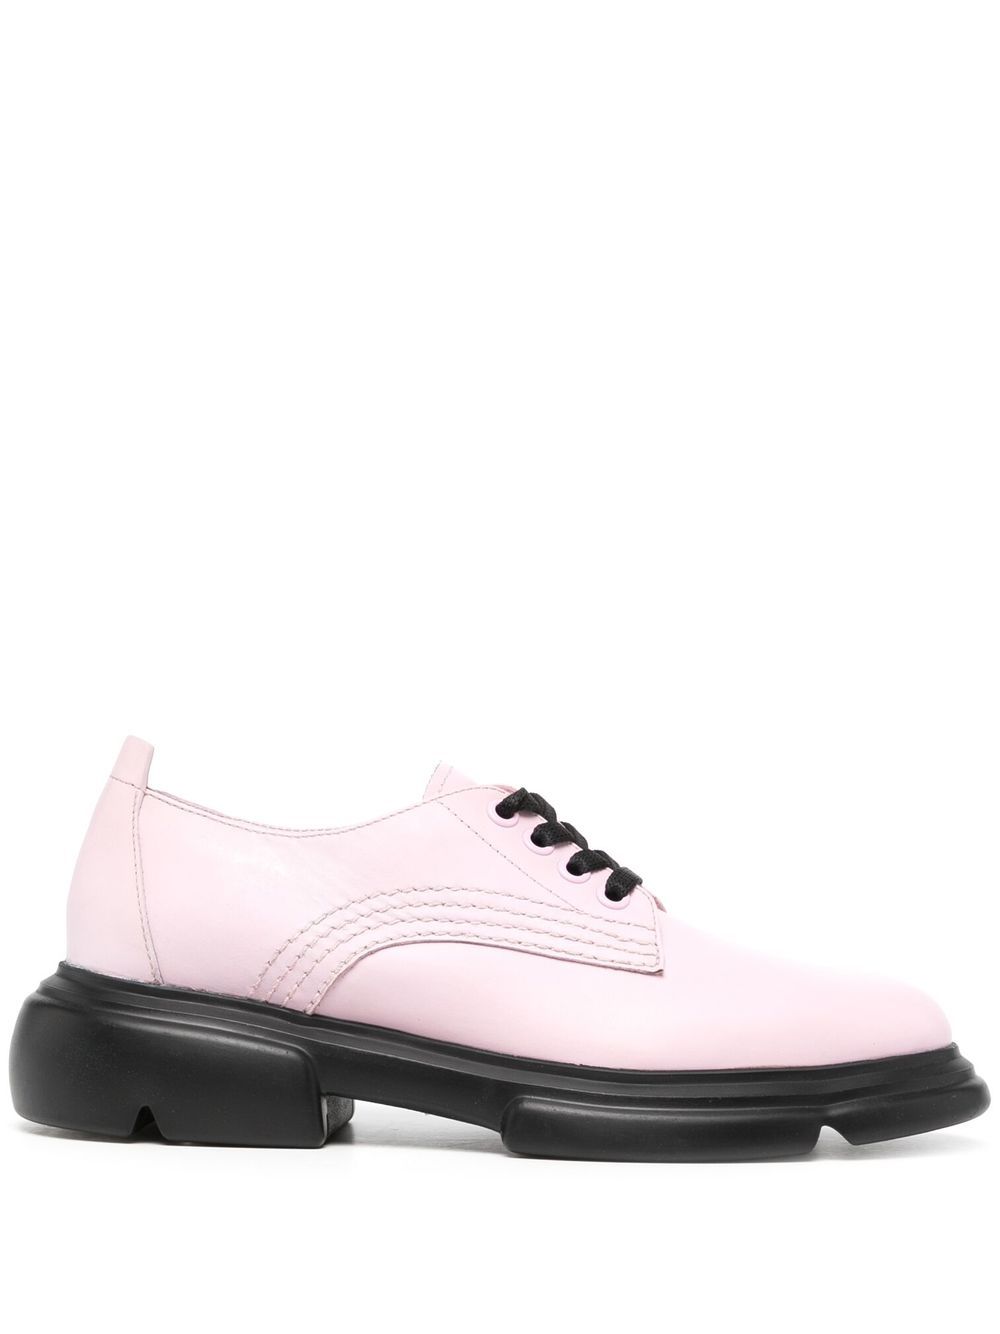 Emporio Armani lace-up leather shoes - Pink